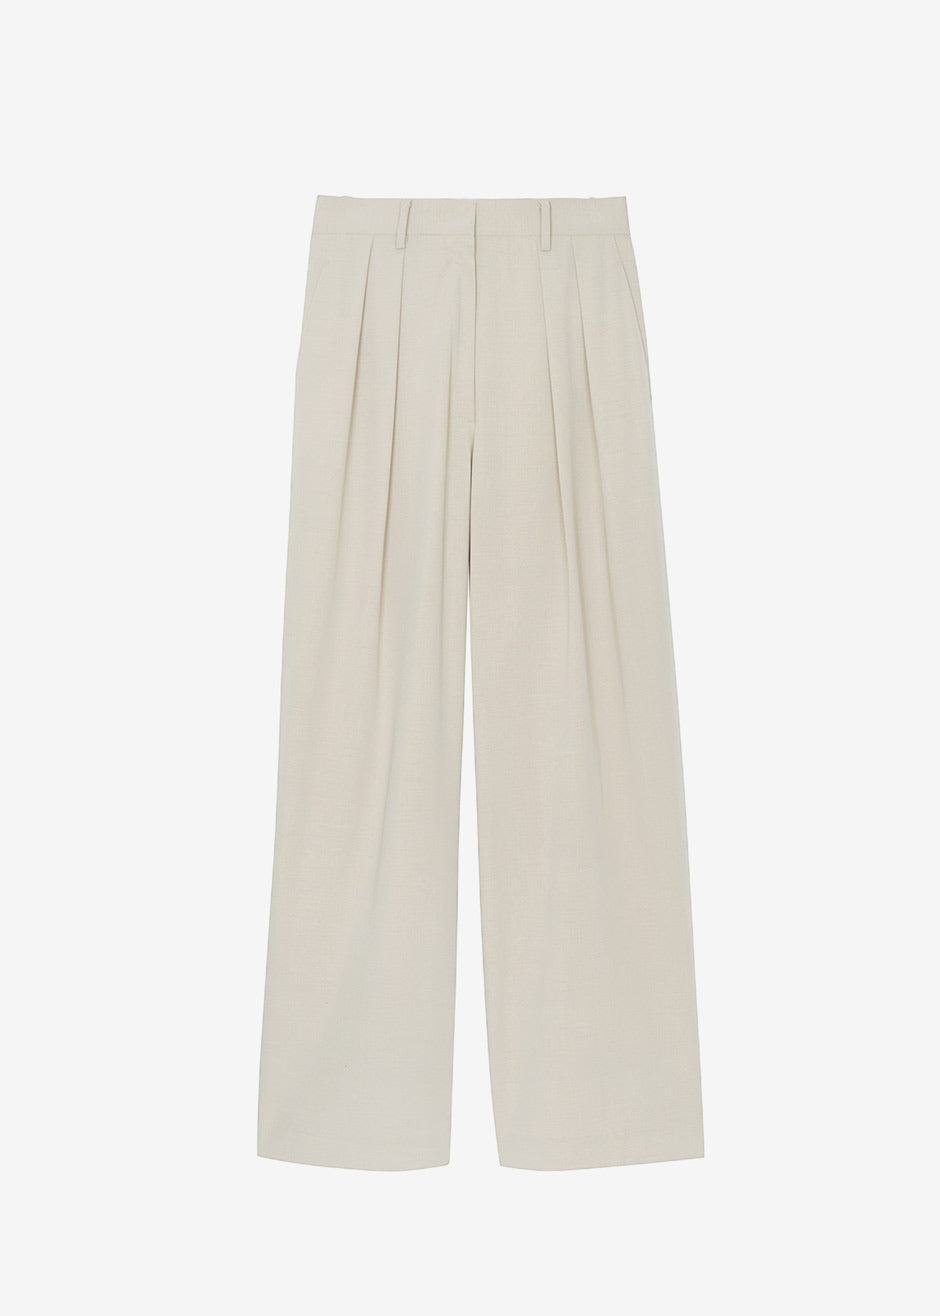 Tansy Pleated Trousers - Beige - 17